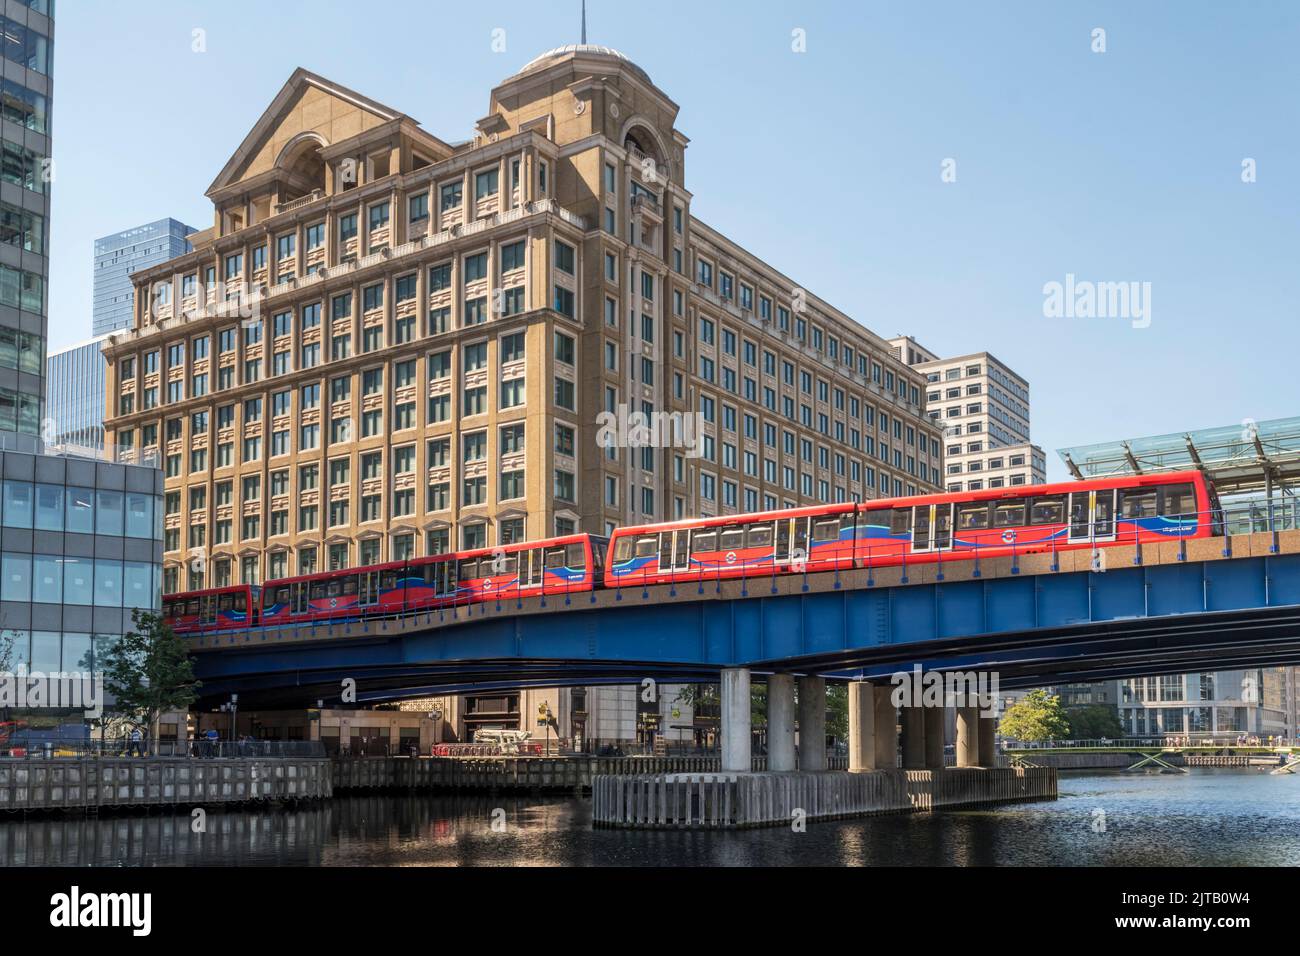 Fisherman's Walk and DLR train crossing part of West India Dock in London's old docklands. Stock Photo